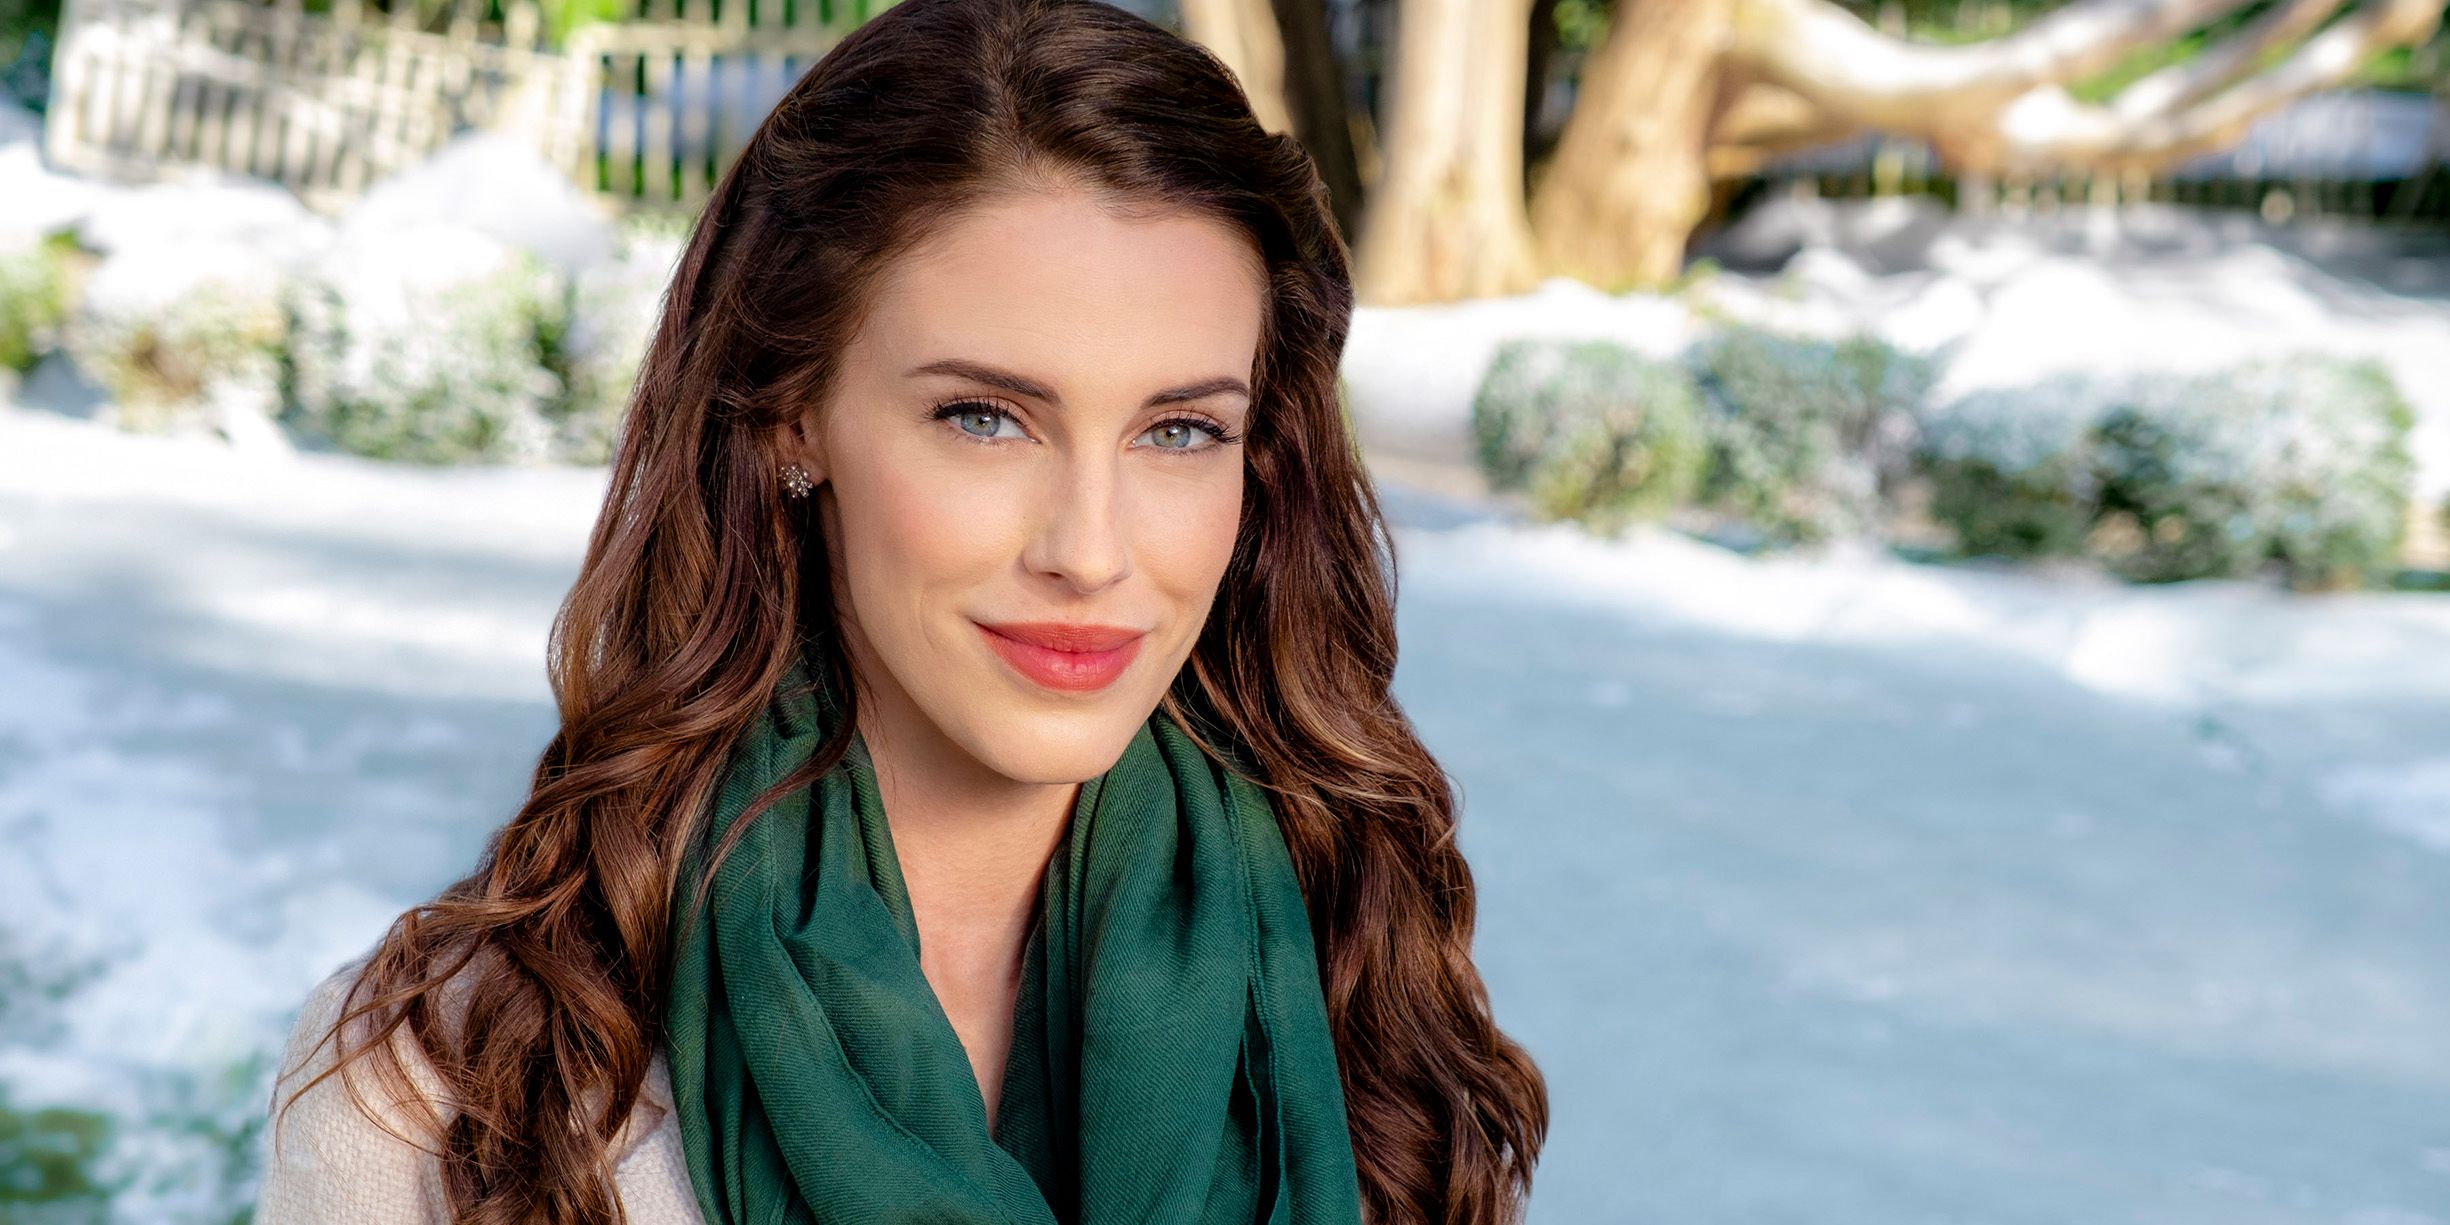 Who Is Jessica Lowndes Meet The Star Of Hallmark S Christmas At Pemberley Manor Jessica lowndes has been nominated for canada's most beautiful stars 2015 and could use your help! christmas at pemberley manor